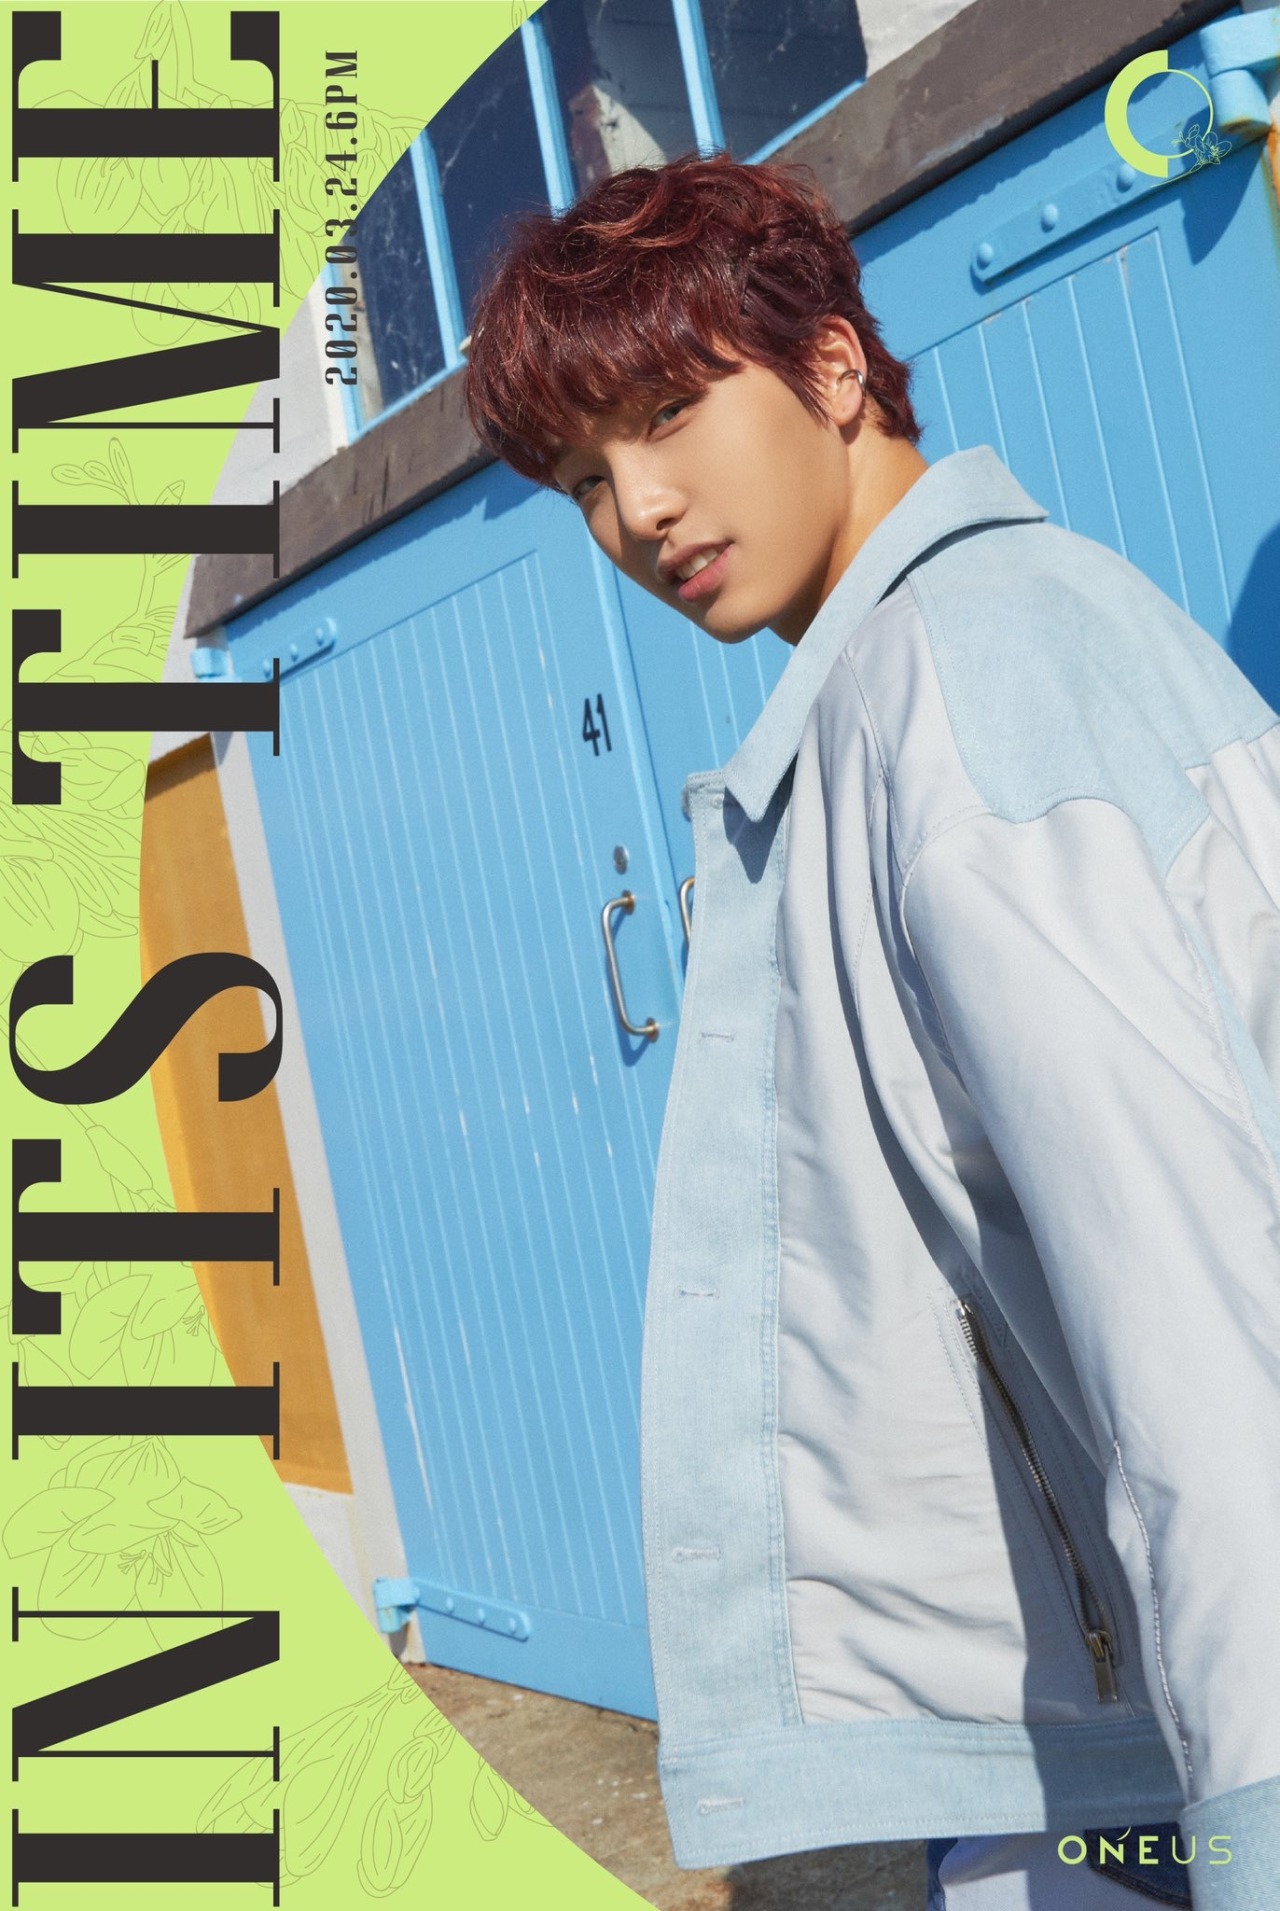 Zhenzhiao Kpop Oneus H01 in its time Poster Single Album K-POP Peripheral Notebook Notebook School Office Supplies 2020